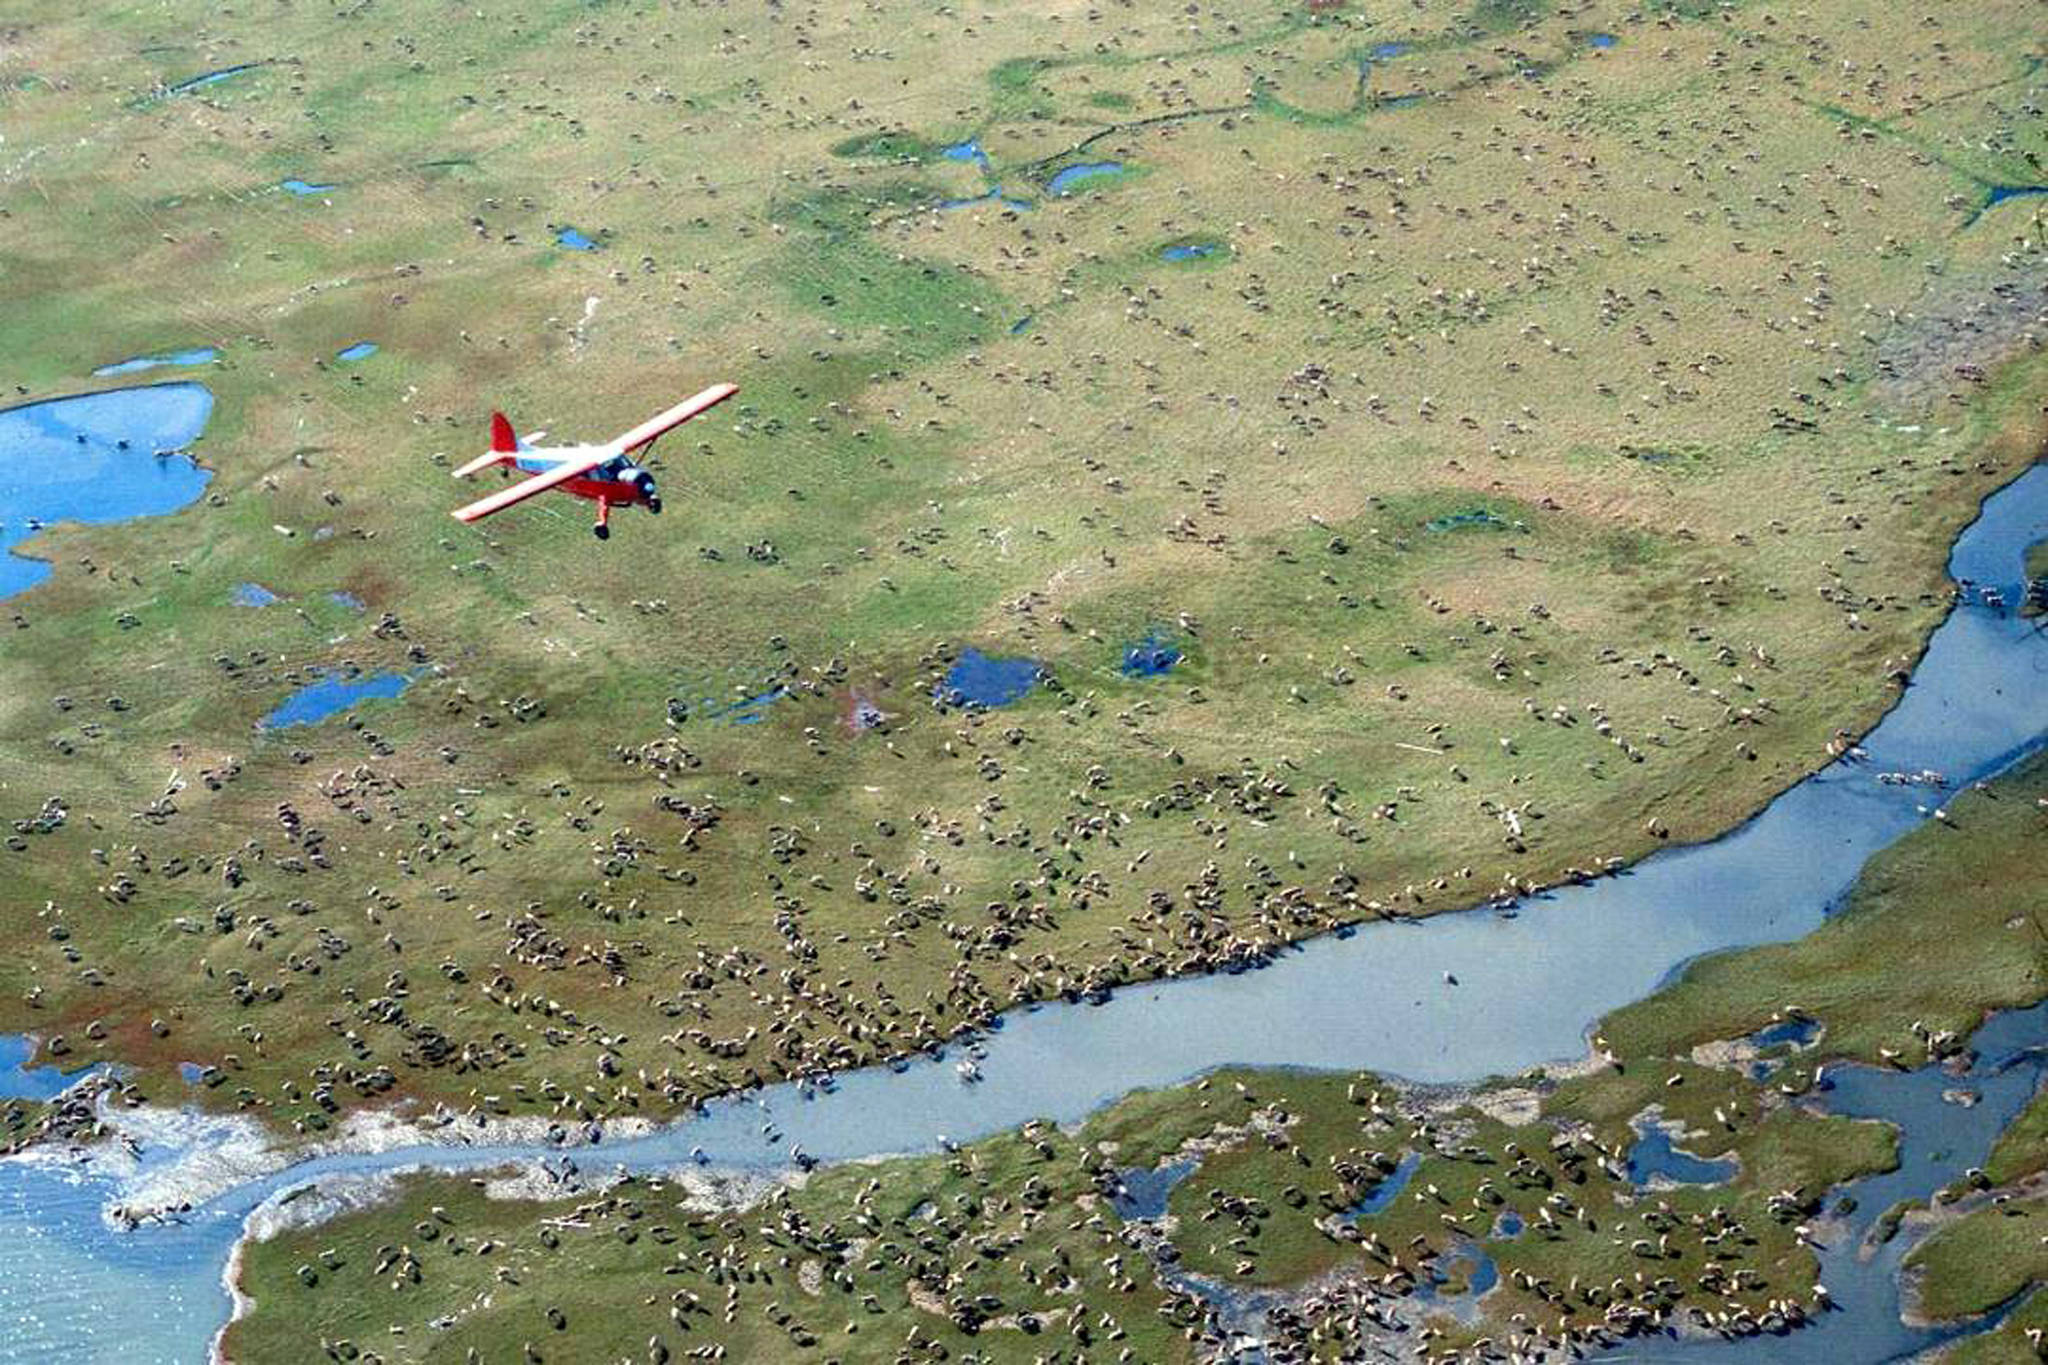 U.S. Fish and Wildlife Service 
In this undated file photo provided by the U.S. Fish and Wildlife Service, an airplane flies over caribou from the Porcupine caribou herd on the coastal plain of the Arctic National Wildlife Refuge in northeast Alaska.